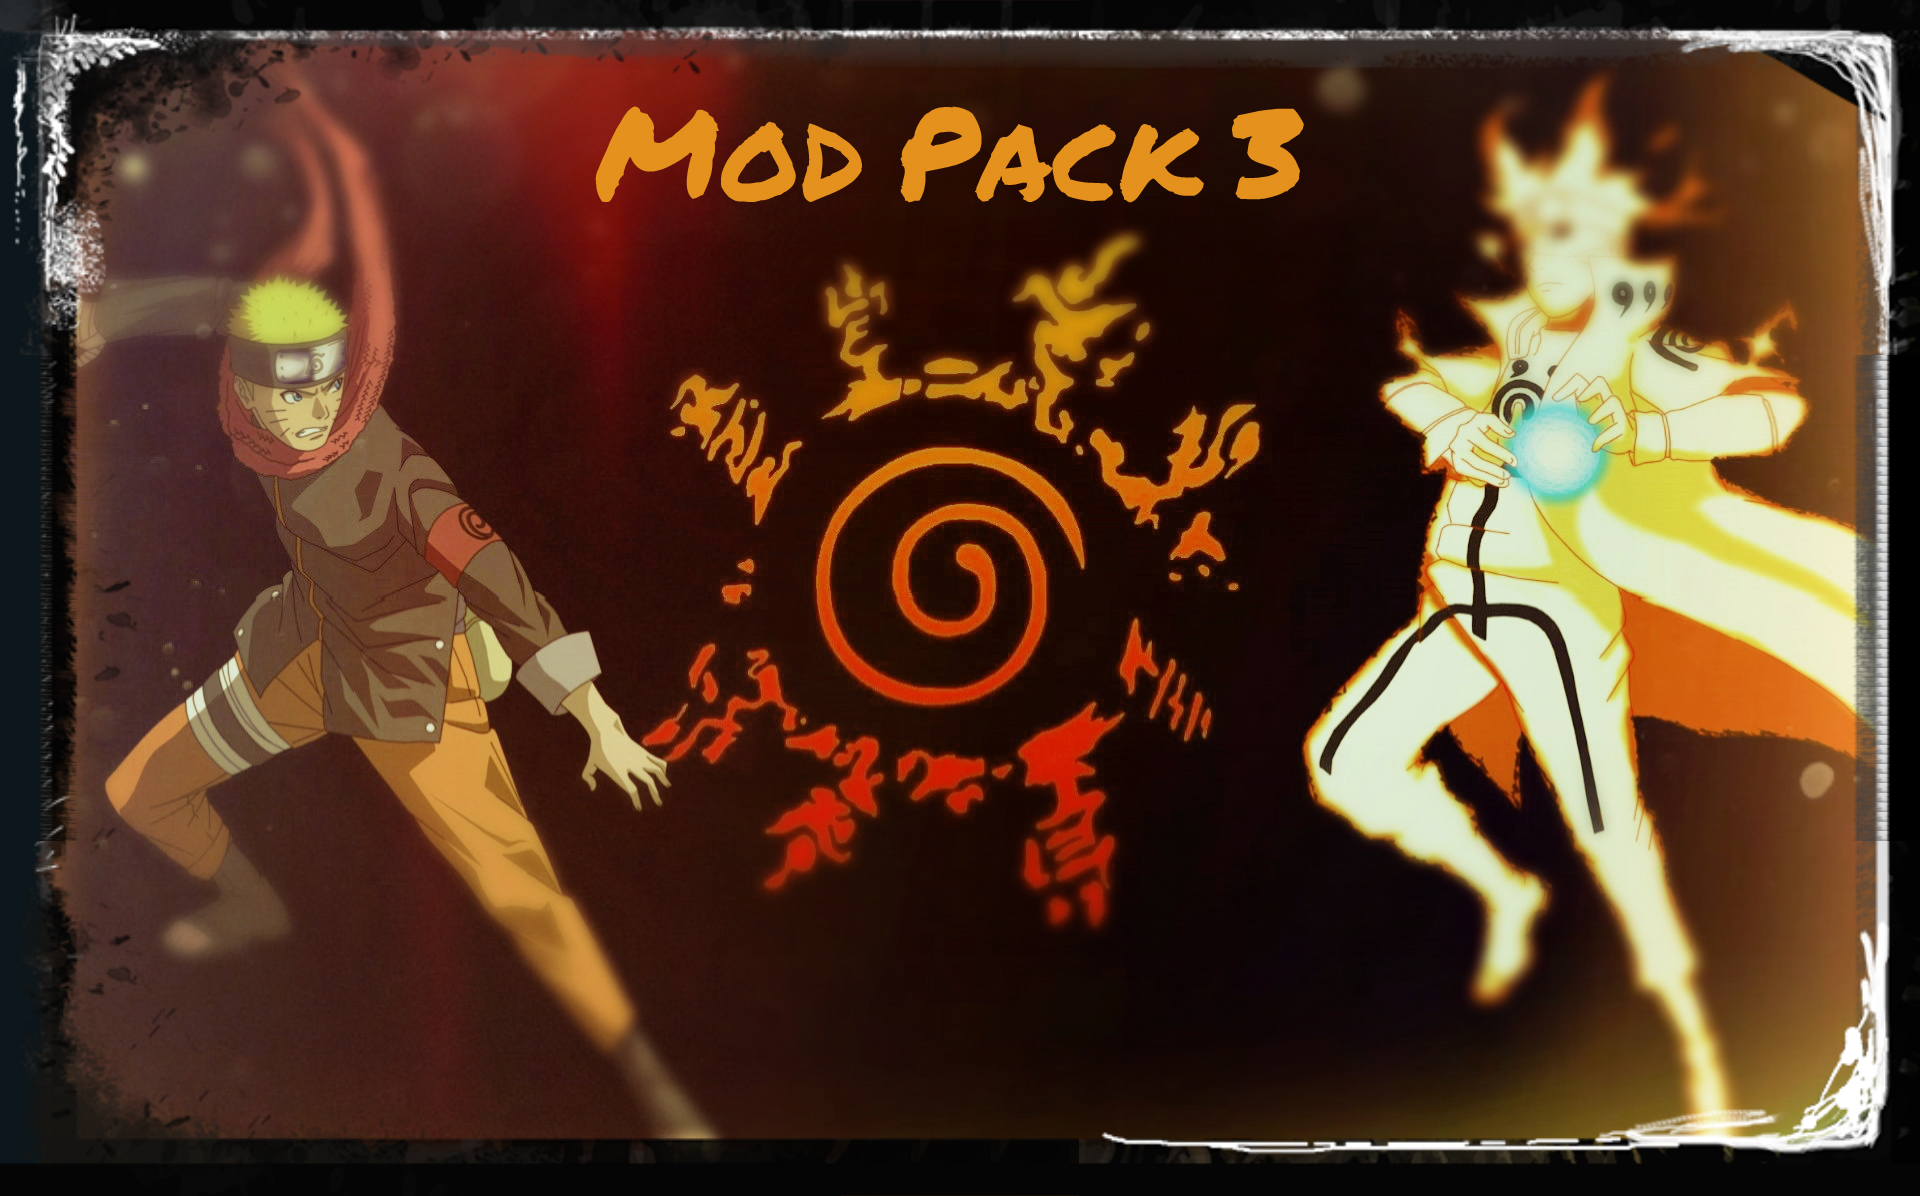 Download Game Naruto Ultimate Ninja Storm 4 Mod For Ppsspp romwine